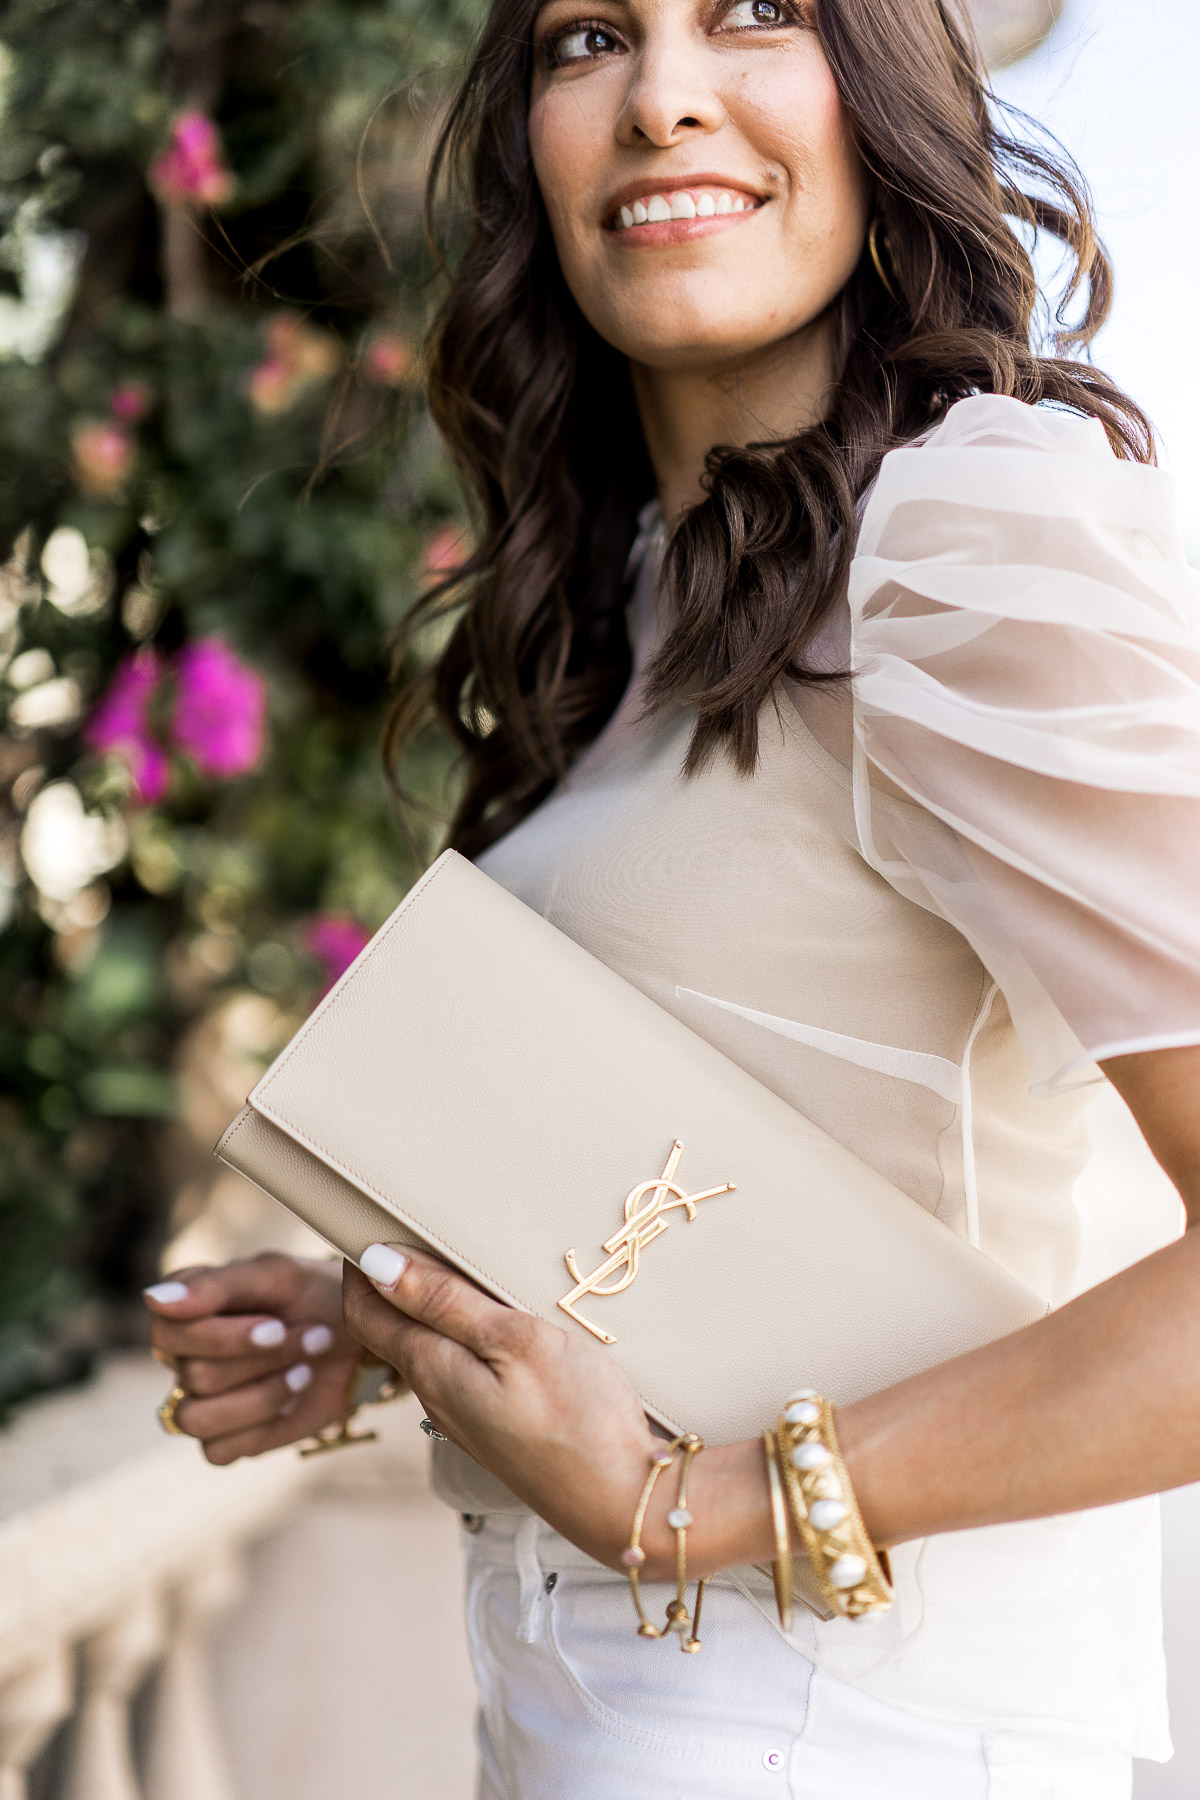 Pair your sheer blouse with the YSL monogram clutch in the nude color for a feminine look